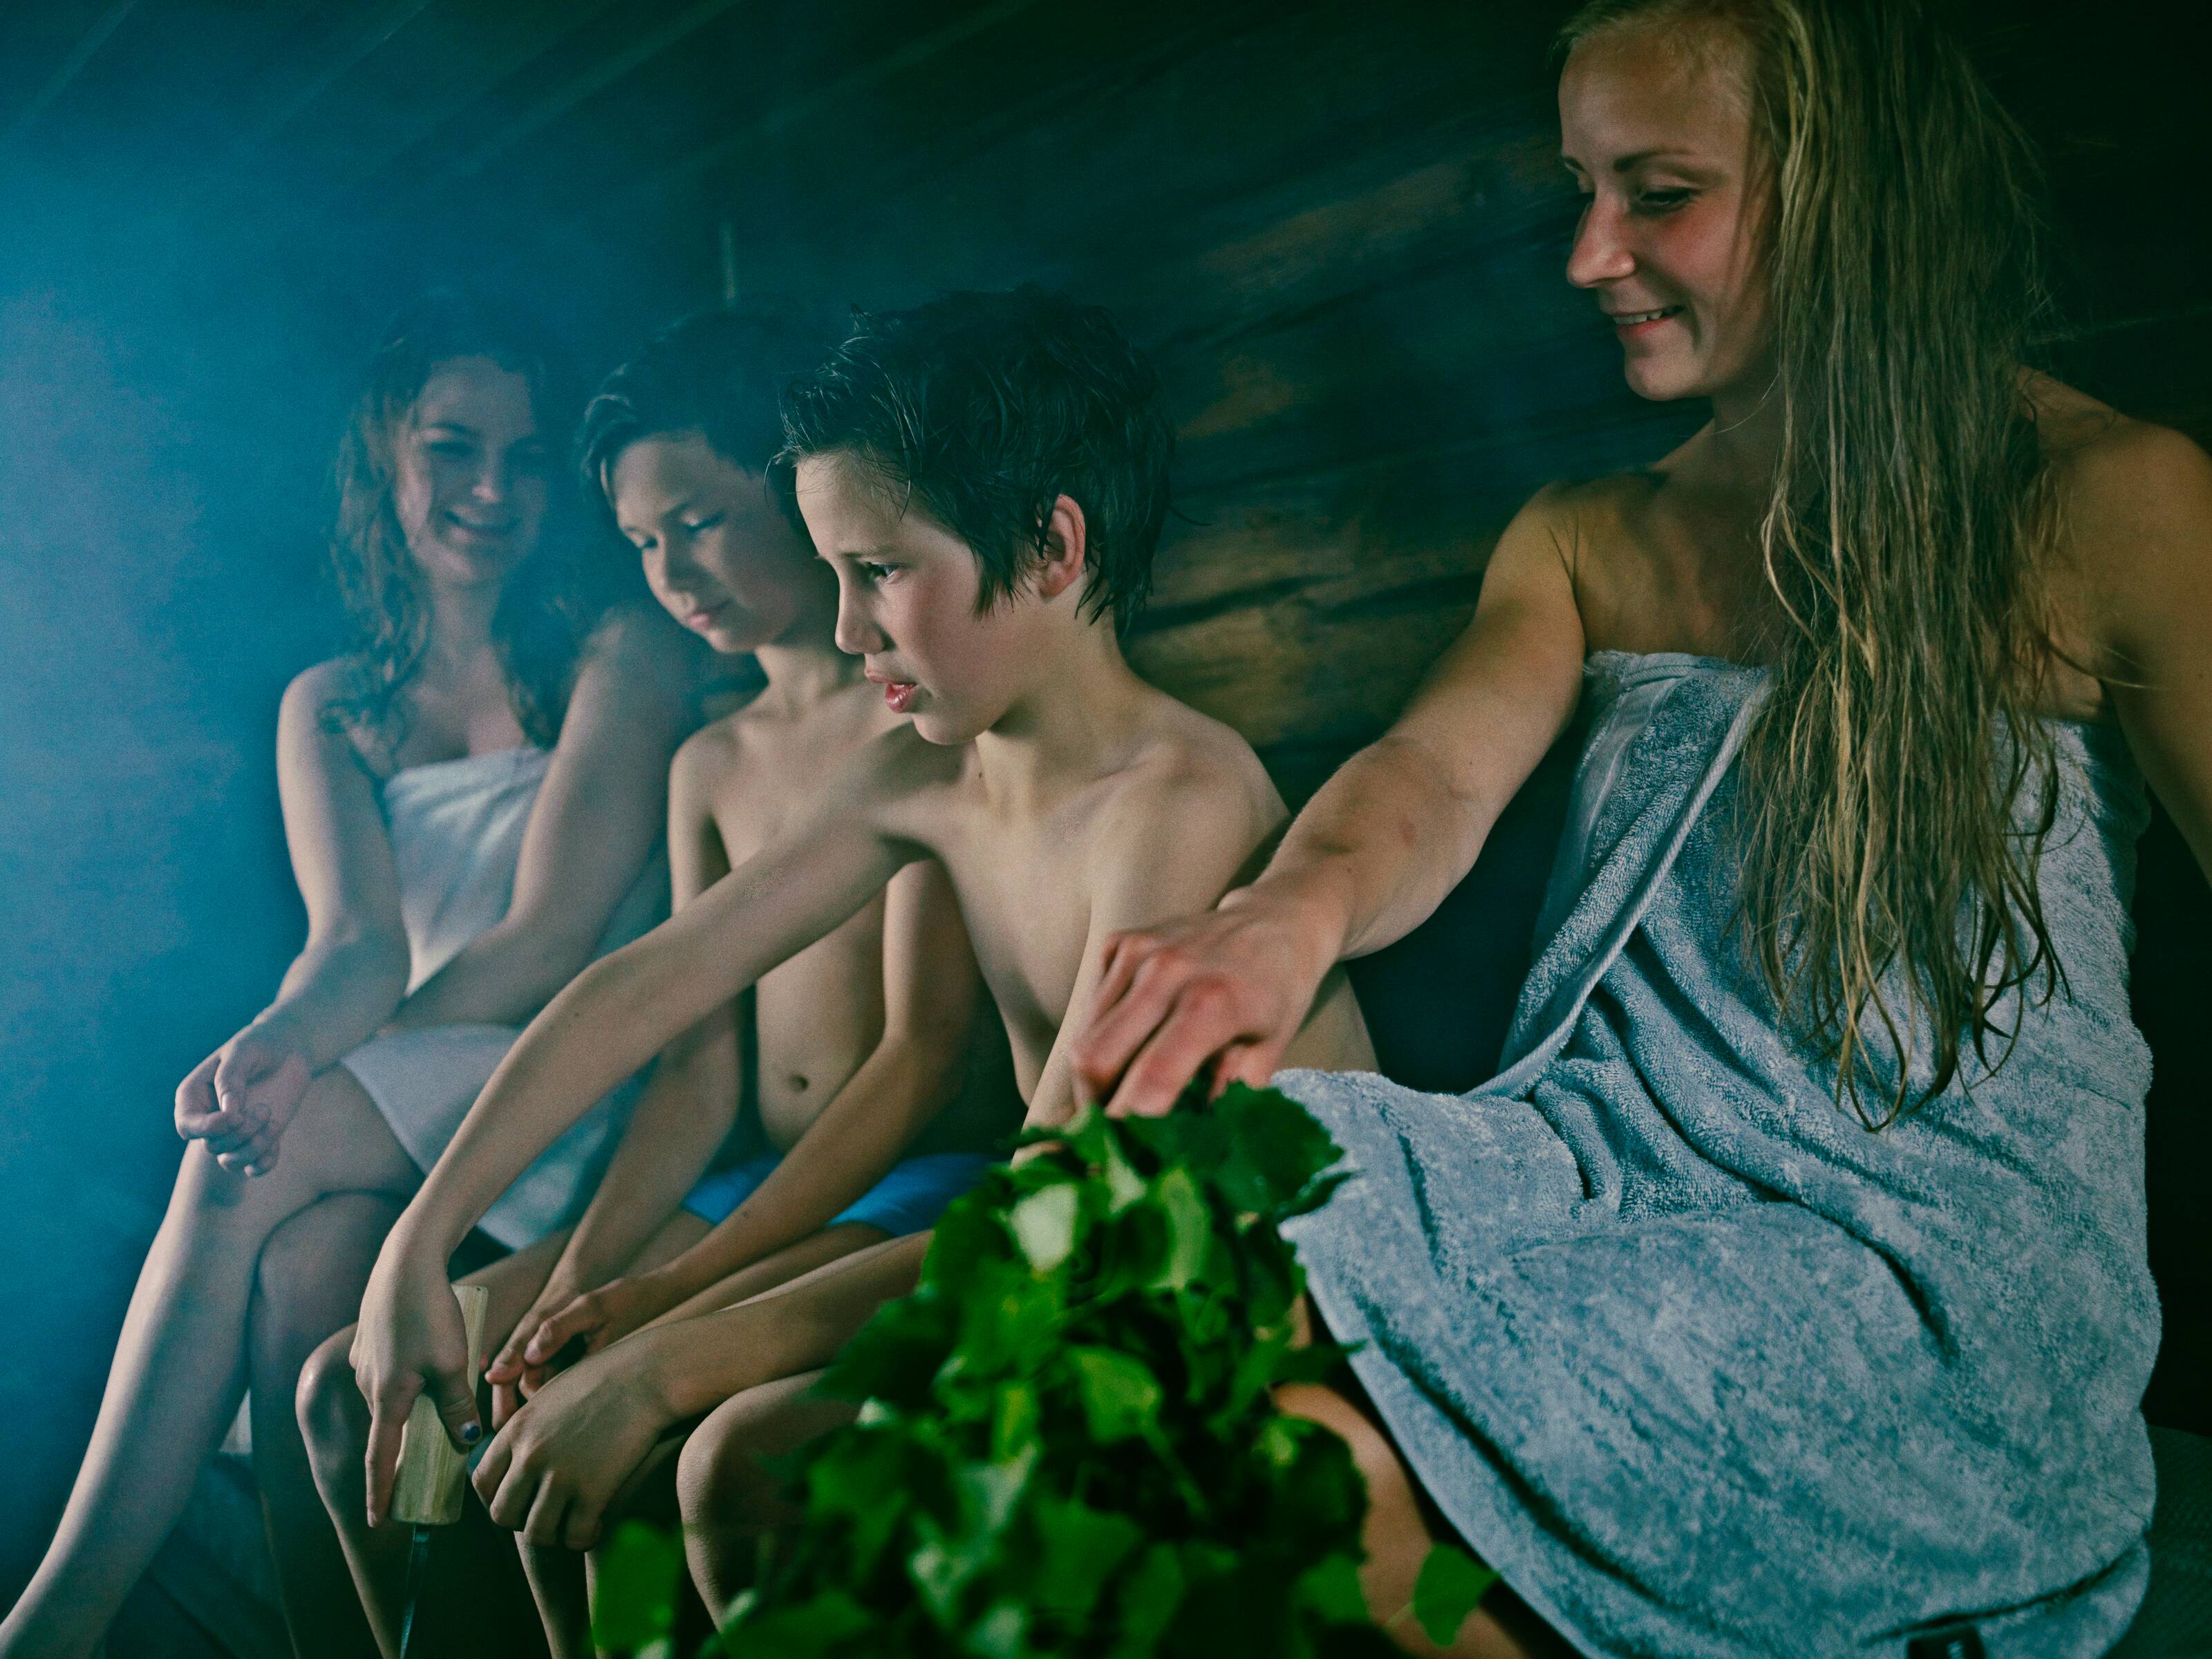 Women and children in a Finnish sauna. A kid throwing water on the sauna stove